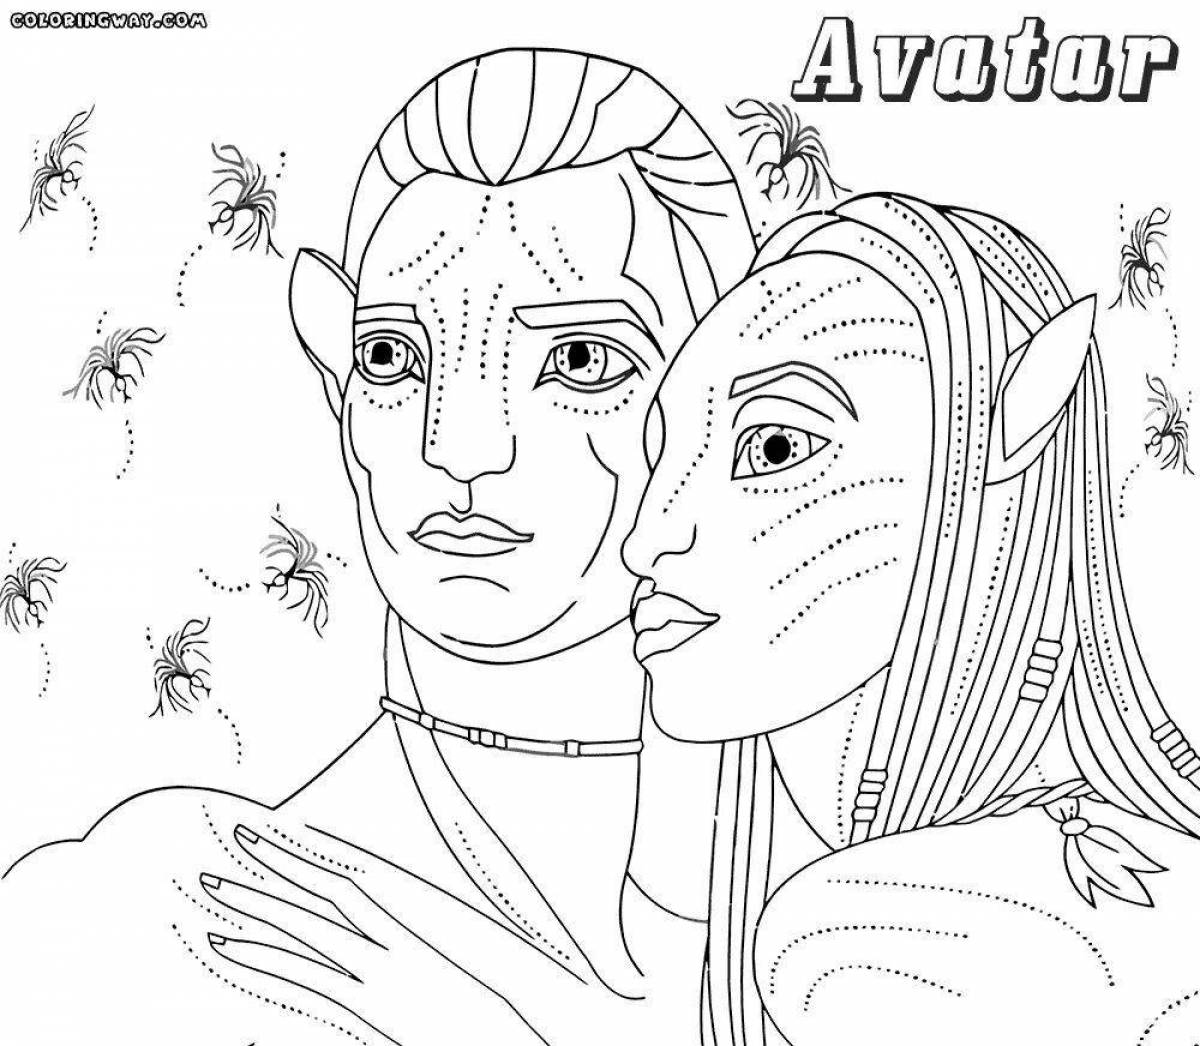 Amazing Avatar movie coloring page